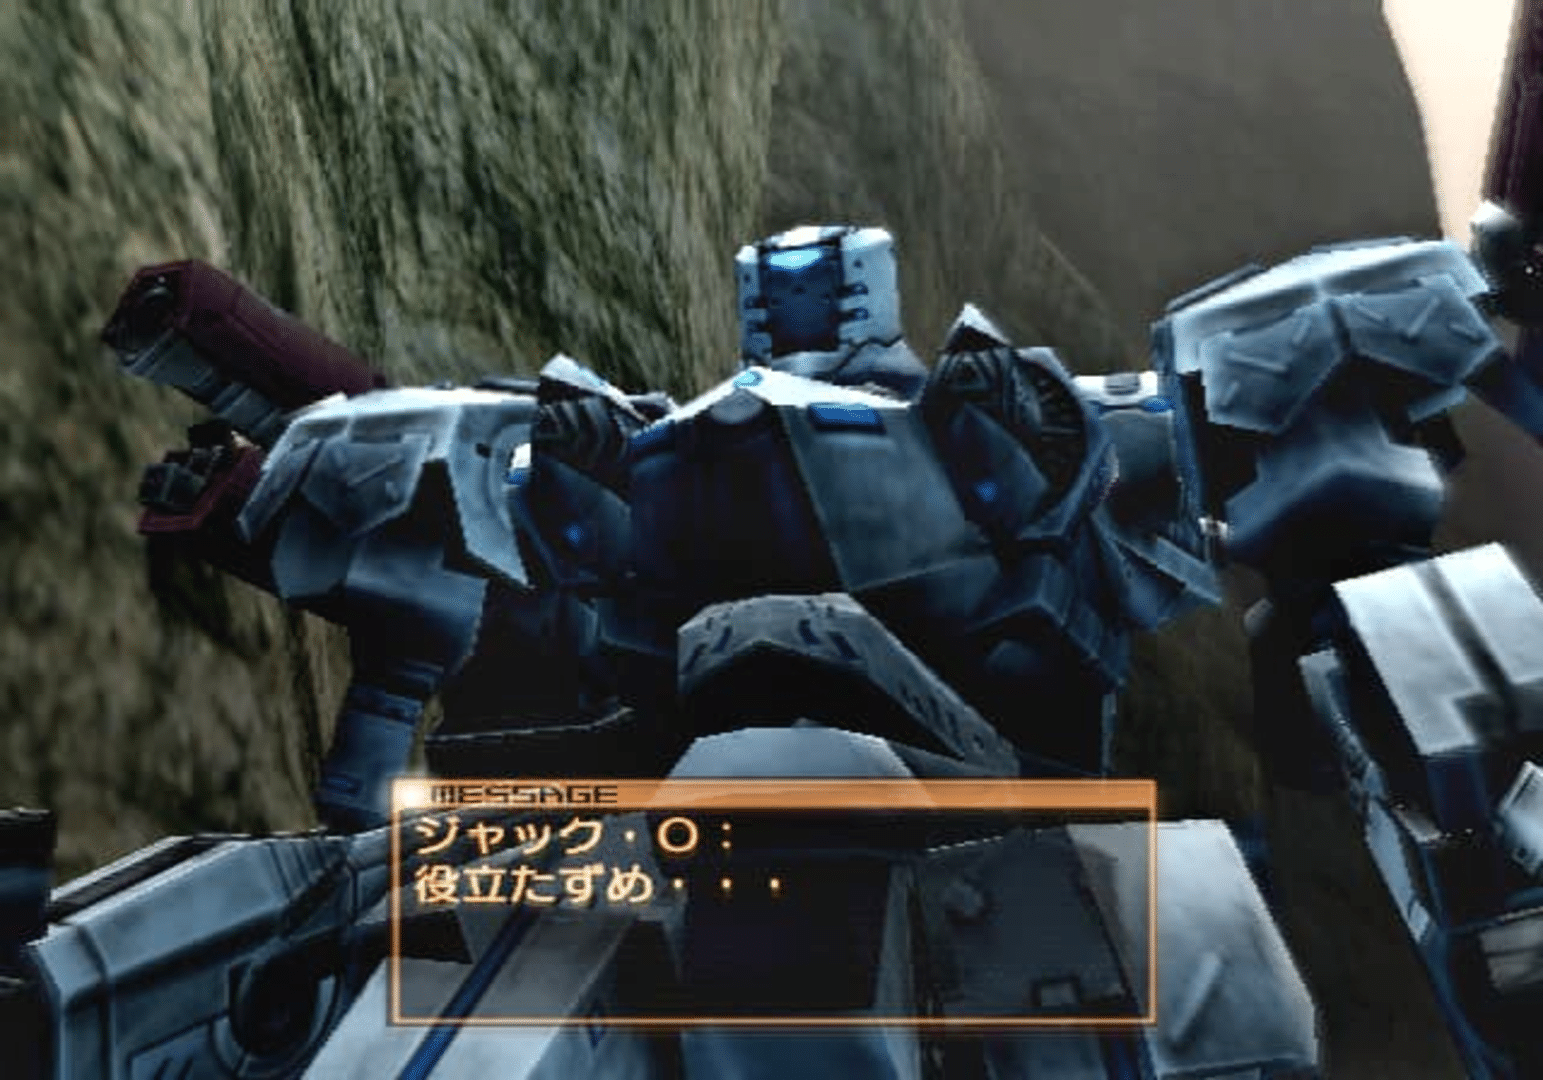 Armored Core 6 review: Left me wanting more even after beating it